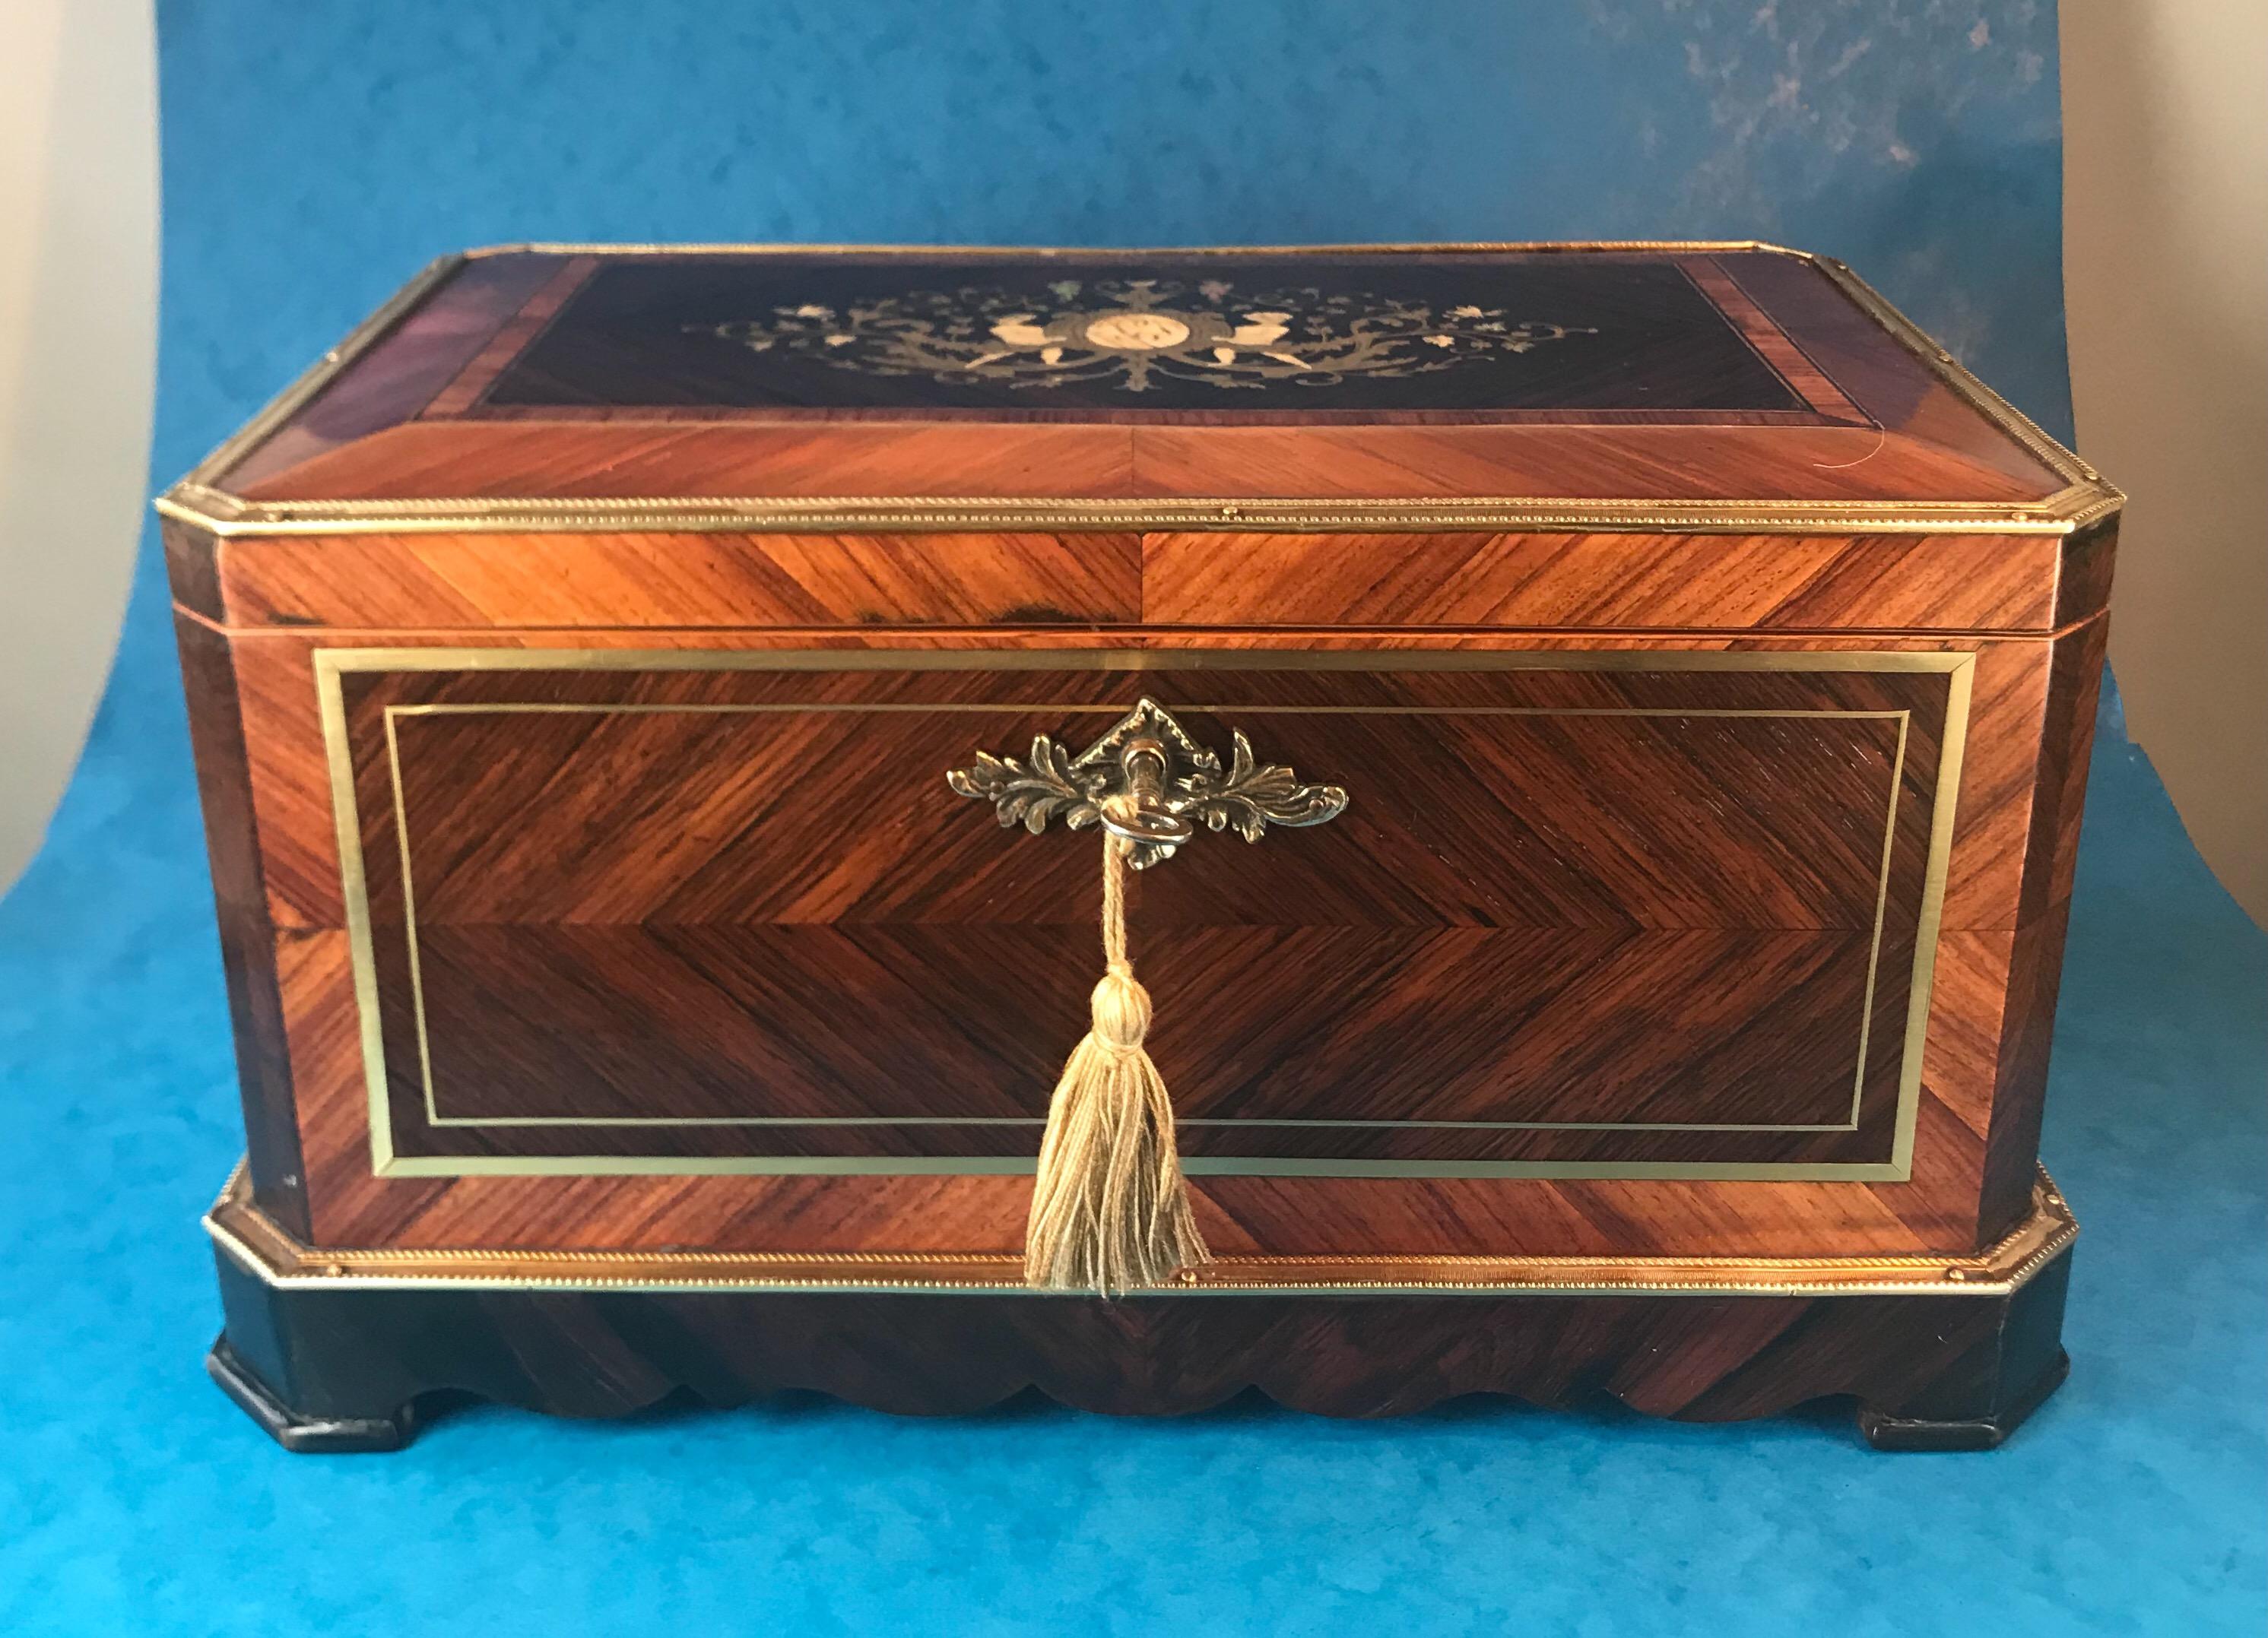 A magnificent Antique French table box. It’s veneered in rosewood, 
the box dates to 1830, its edged in brass and it’s brass and angle cut Tulipwood inlaid. 

The centre of the box it has a beautiful picture of brass inlaid flowers, beaches and